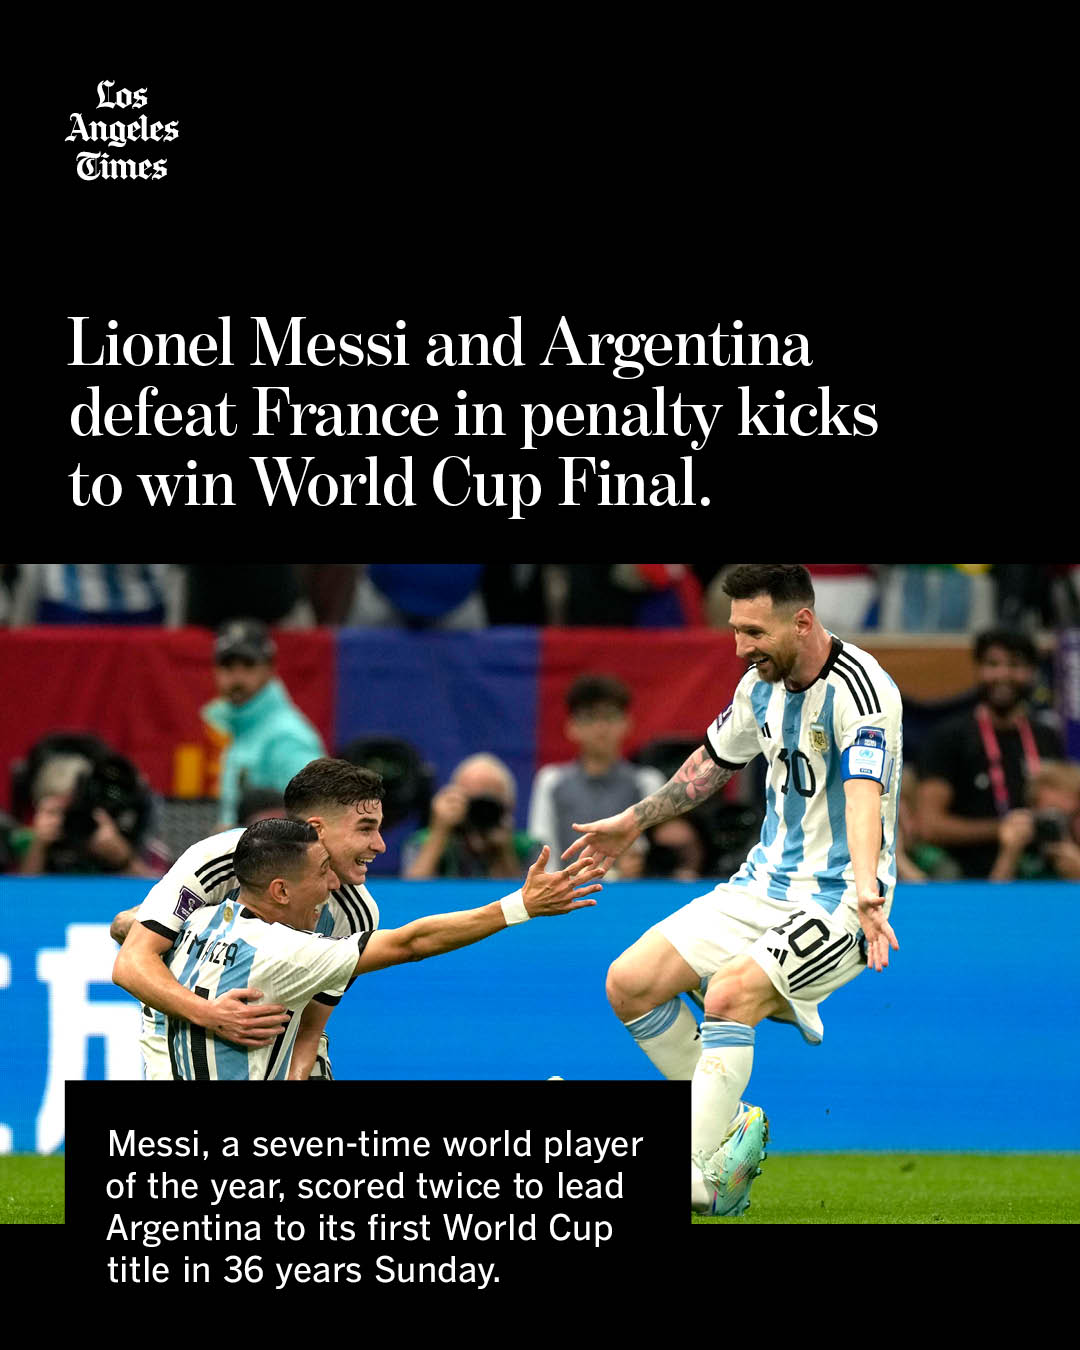 World Cup Final: Argentina wins in penalty kicks